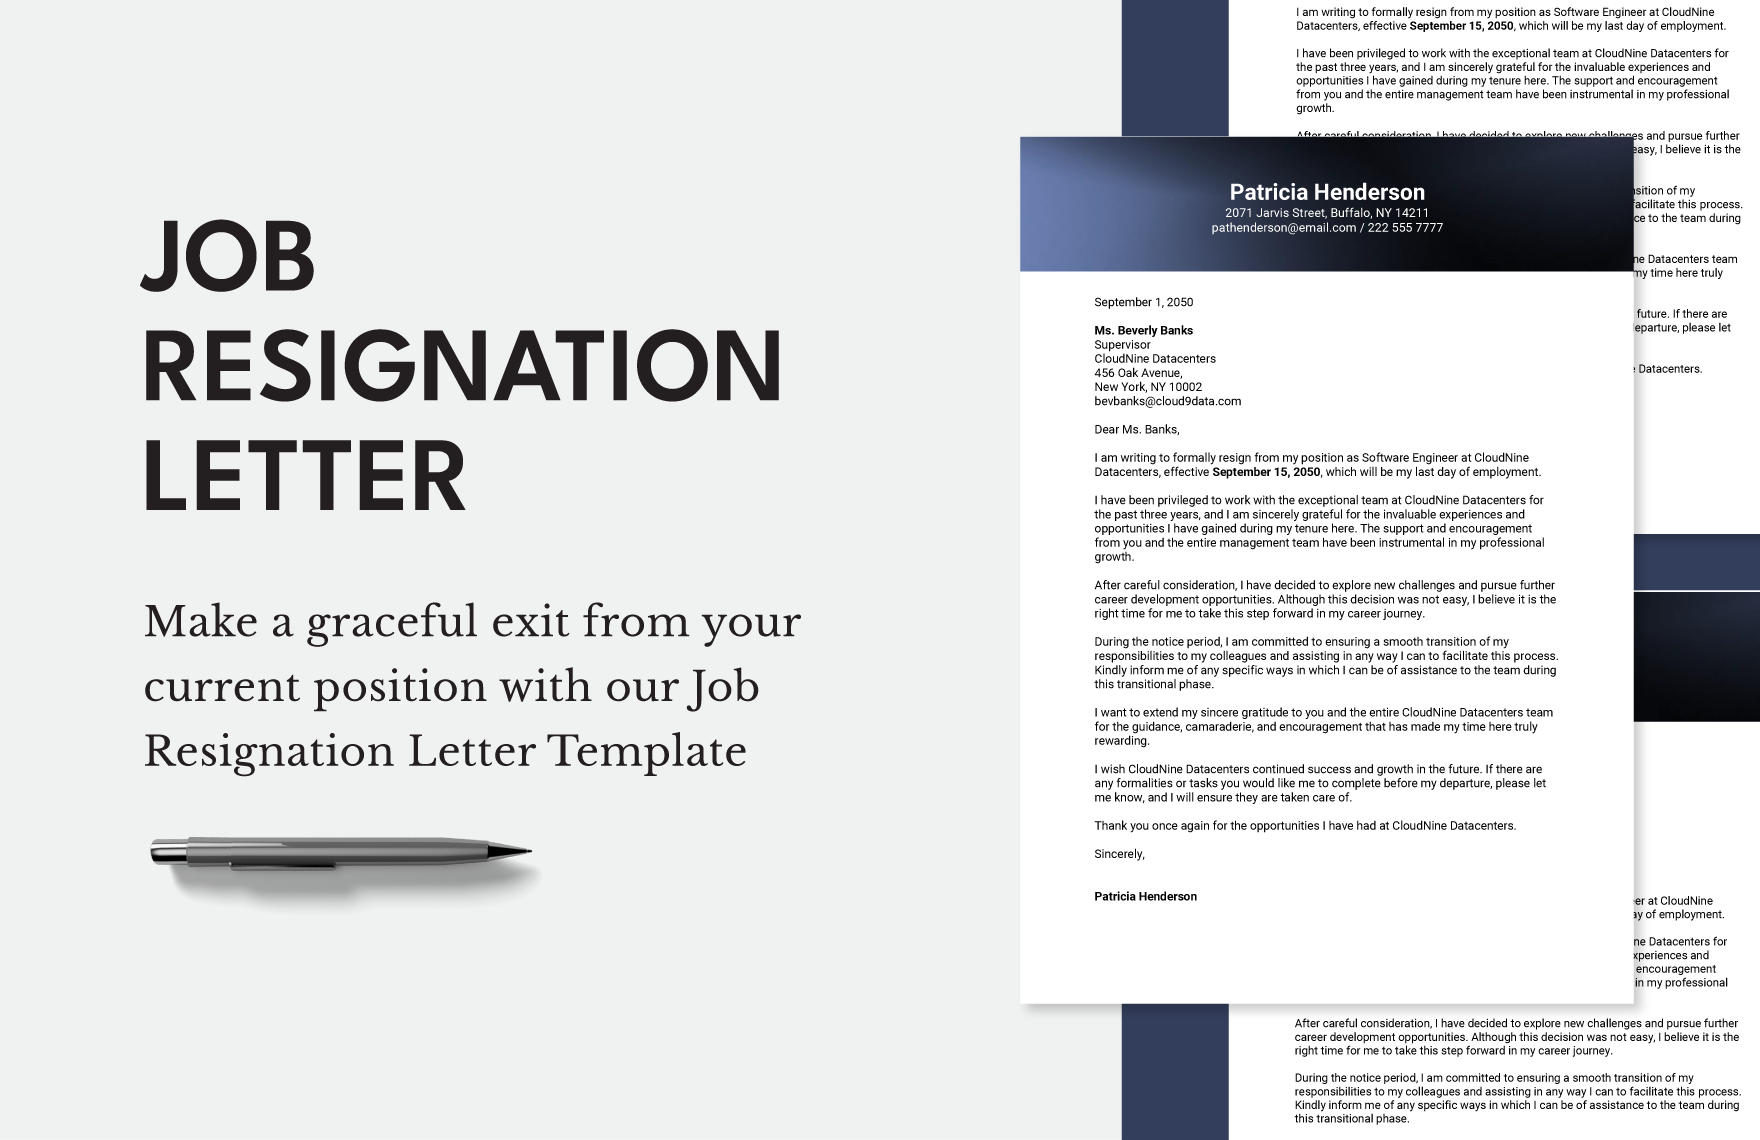 Job Resignation Letter in Word, Google Docs, PDF, Apple Pages, Outlook